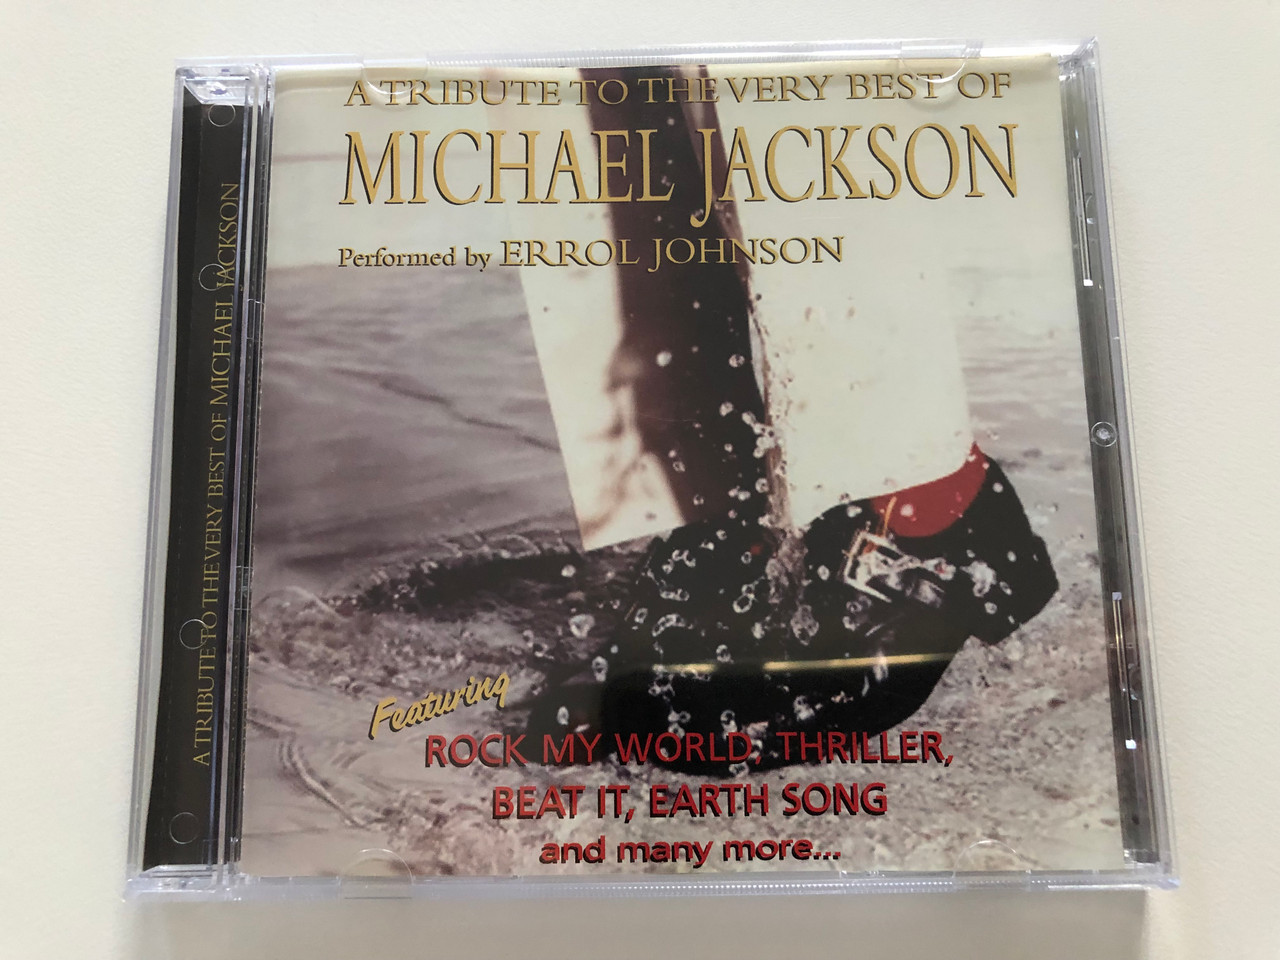 https://cdn10.bigcommerce.com/s-62bdpkt7pb/products/30952/images/182507/A_Tribute_To_The_Very_Best_Of_Michael_Jacskon_-_Performed_by_Errol_Johnson_Featuring_Rock_My_World_Thriller_Beat_It_Earth_Song_and_many_more..._SP._Series_Audio_CD_SP089-2_1__45379.1624554050.1280.1280.JPG?c=2